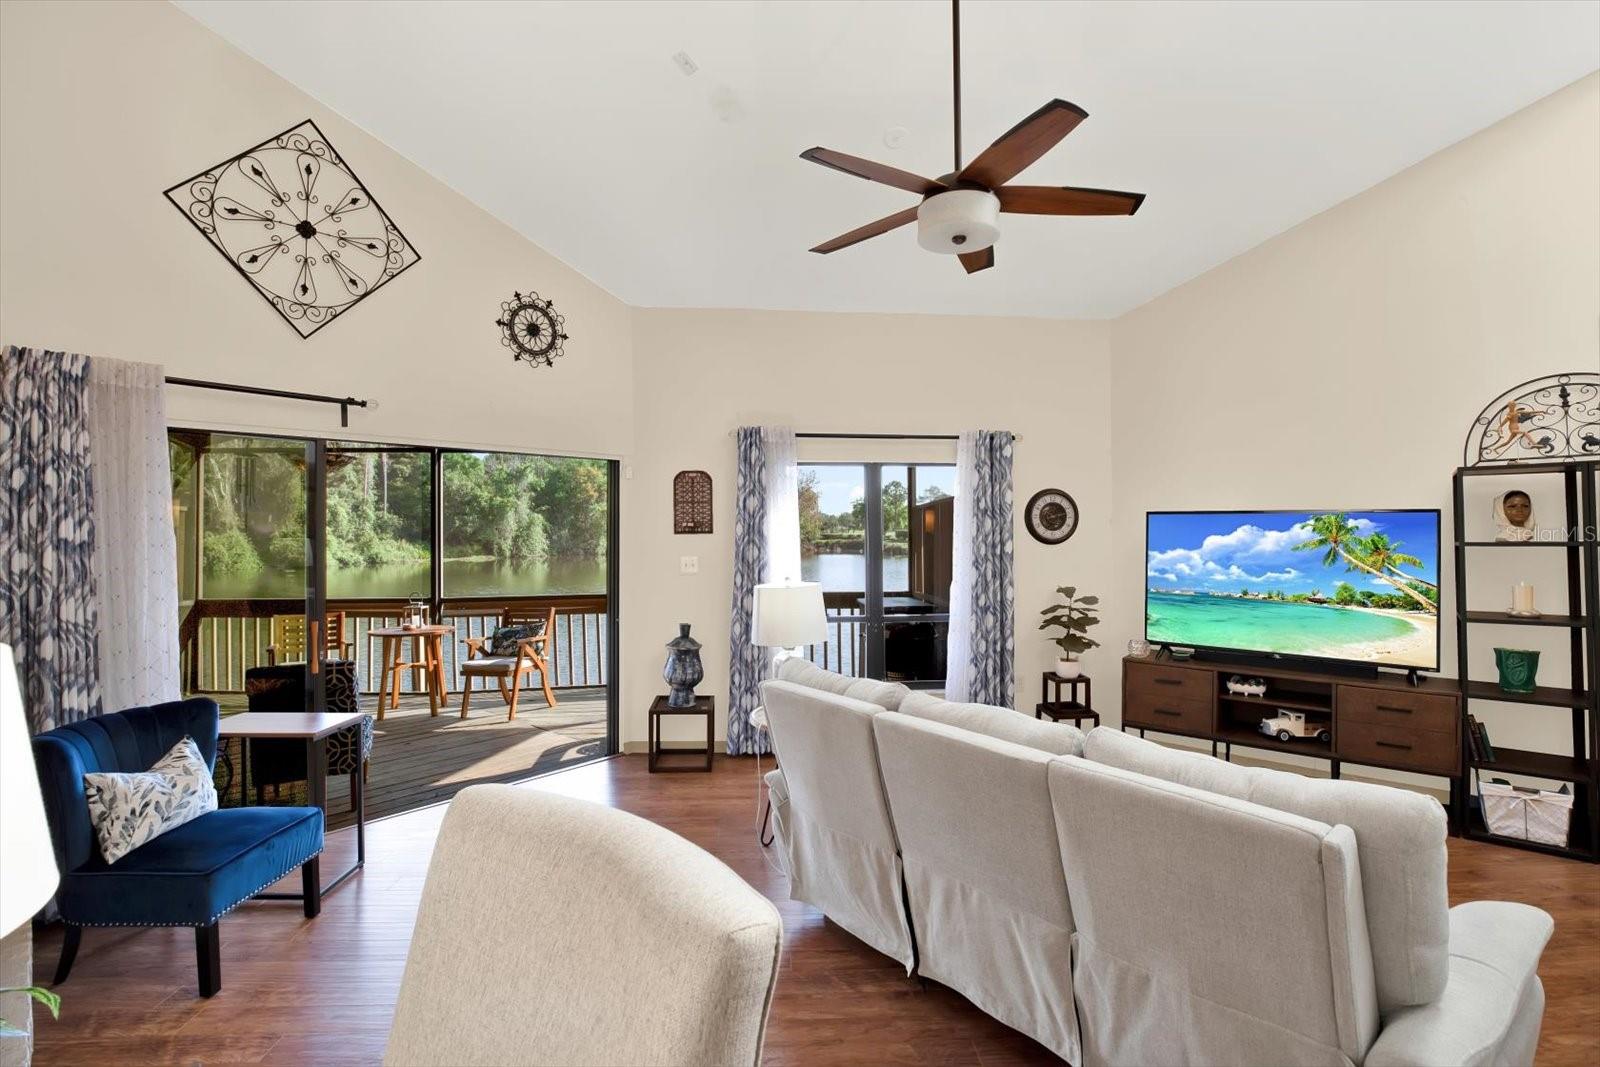 Vaulted Ceilings in living room and brings in plenty of natural light.